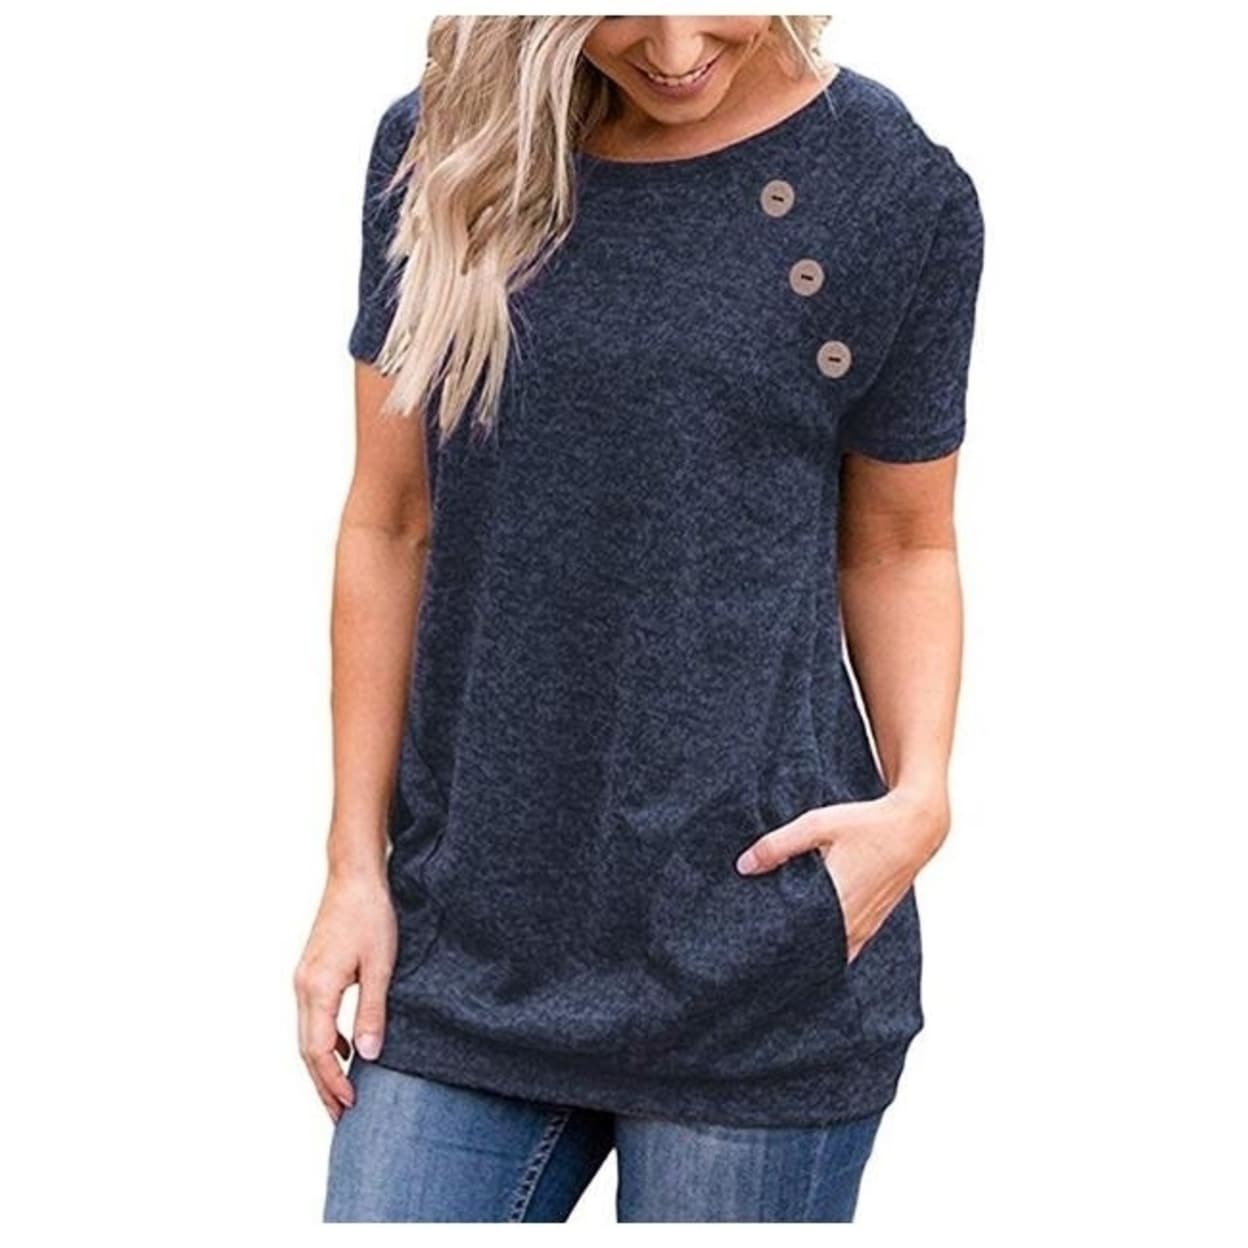 women's casual tops and blouses